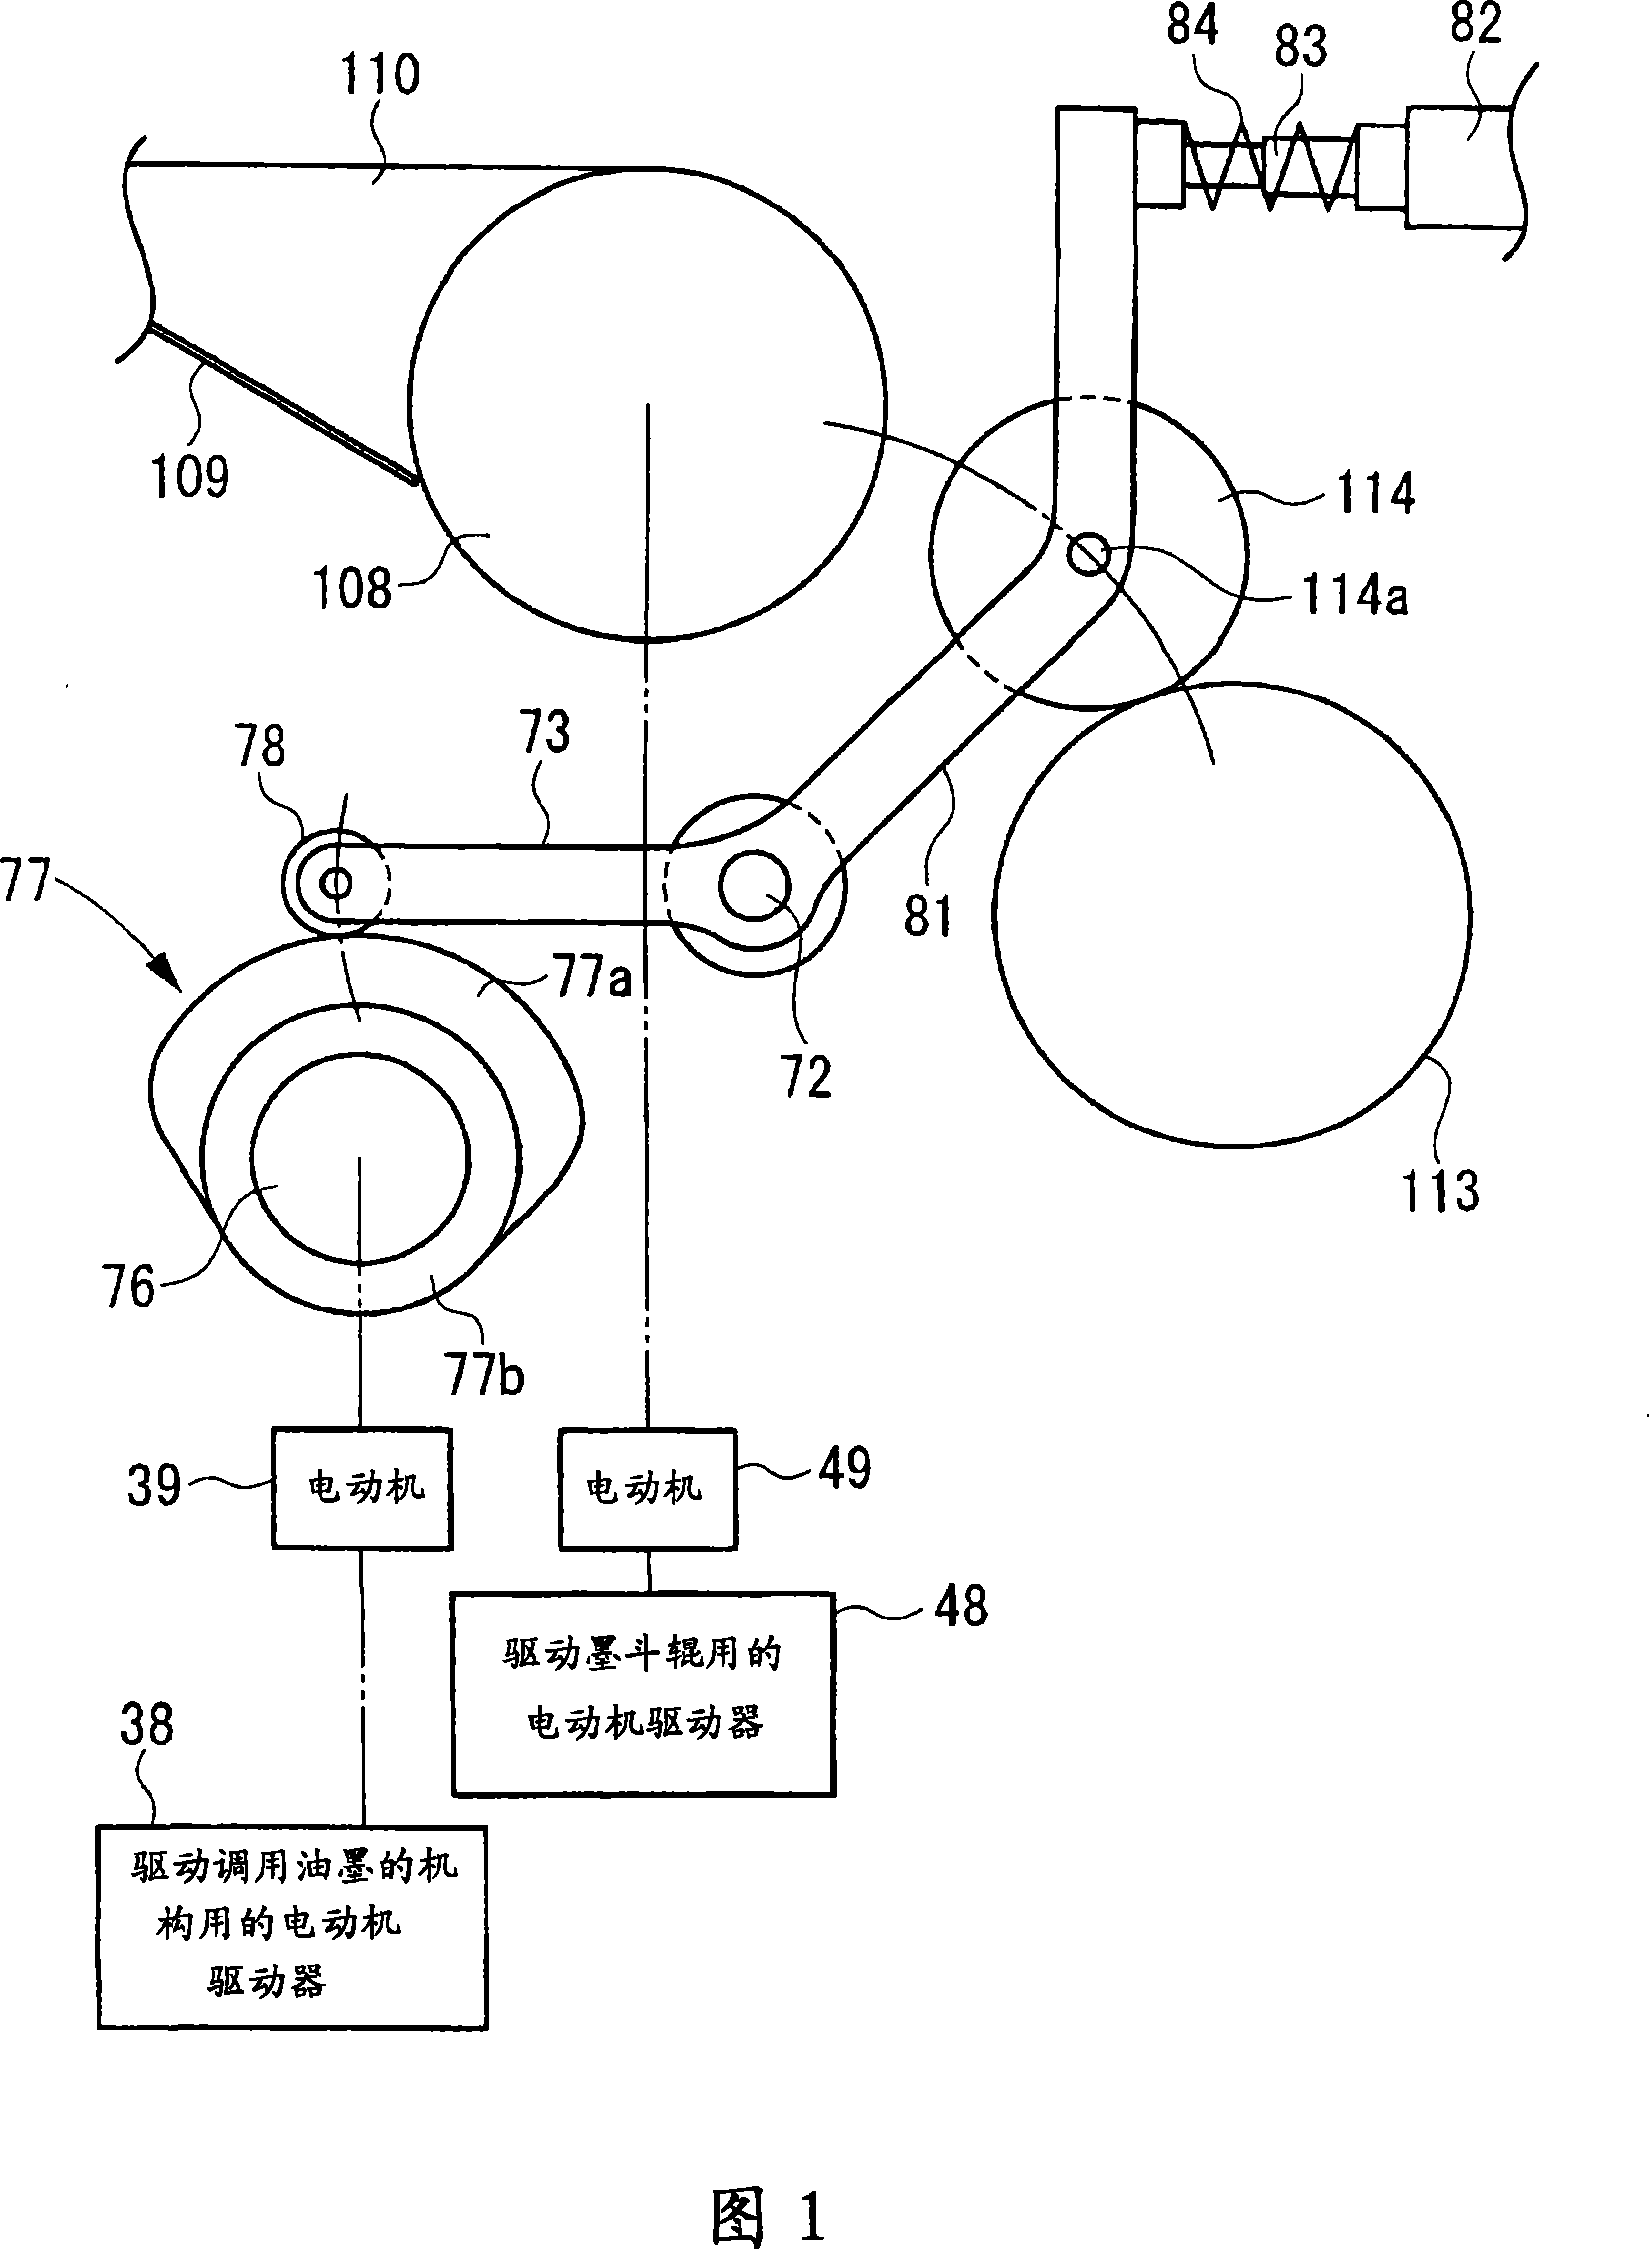 Ink feed control method and ink feed control system